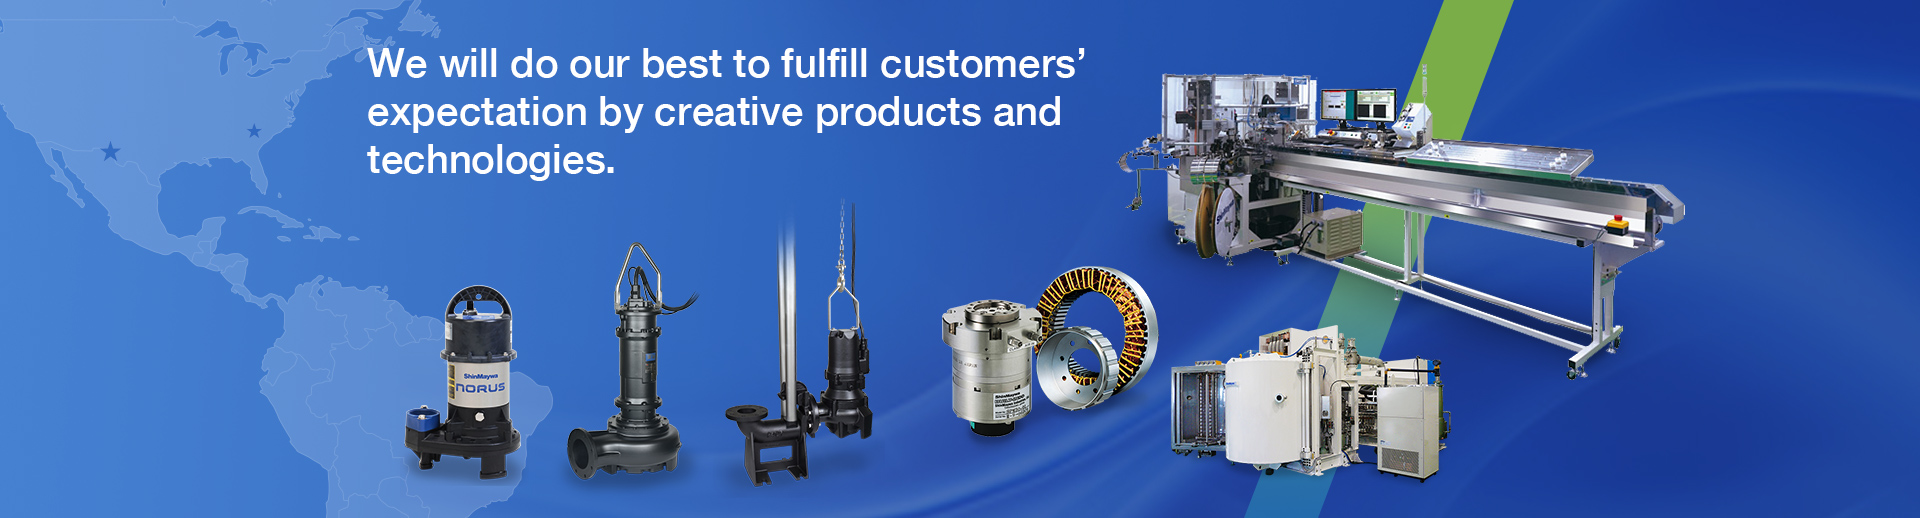 We will do our best to fulfill customers' expectation by creative products and technologies.